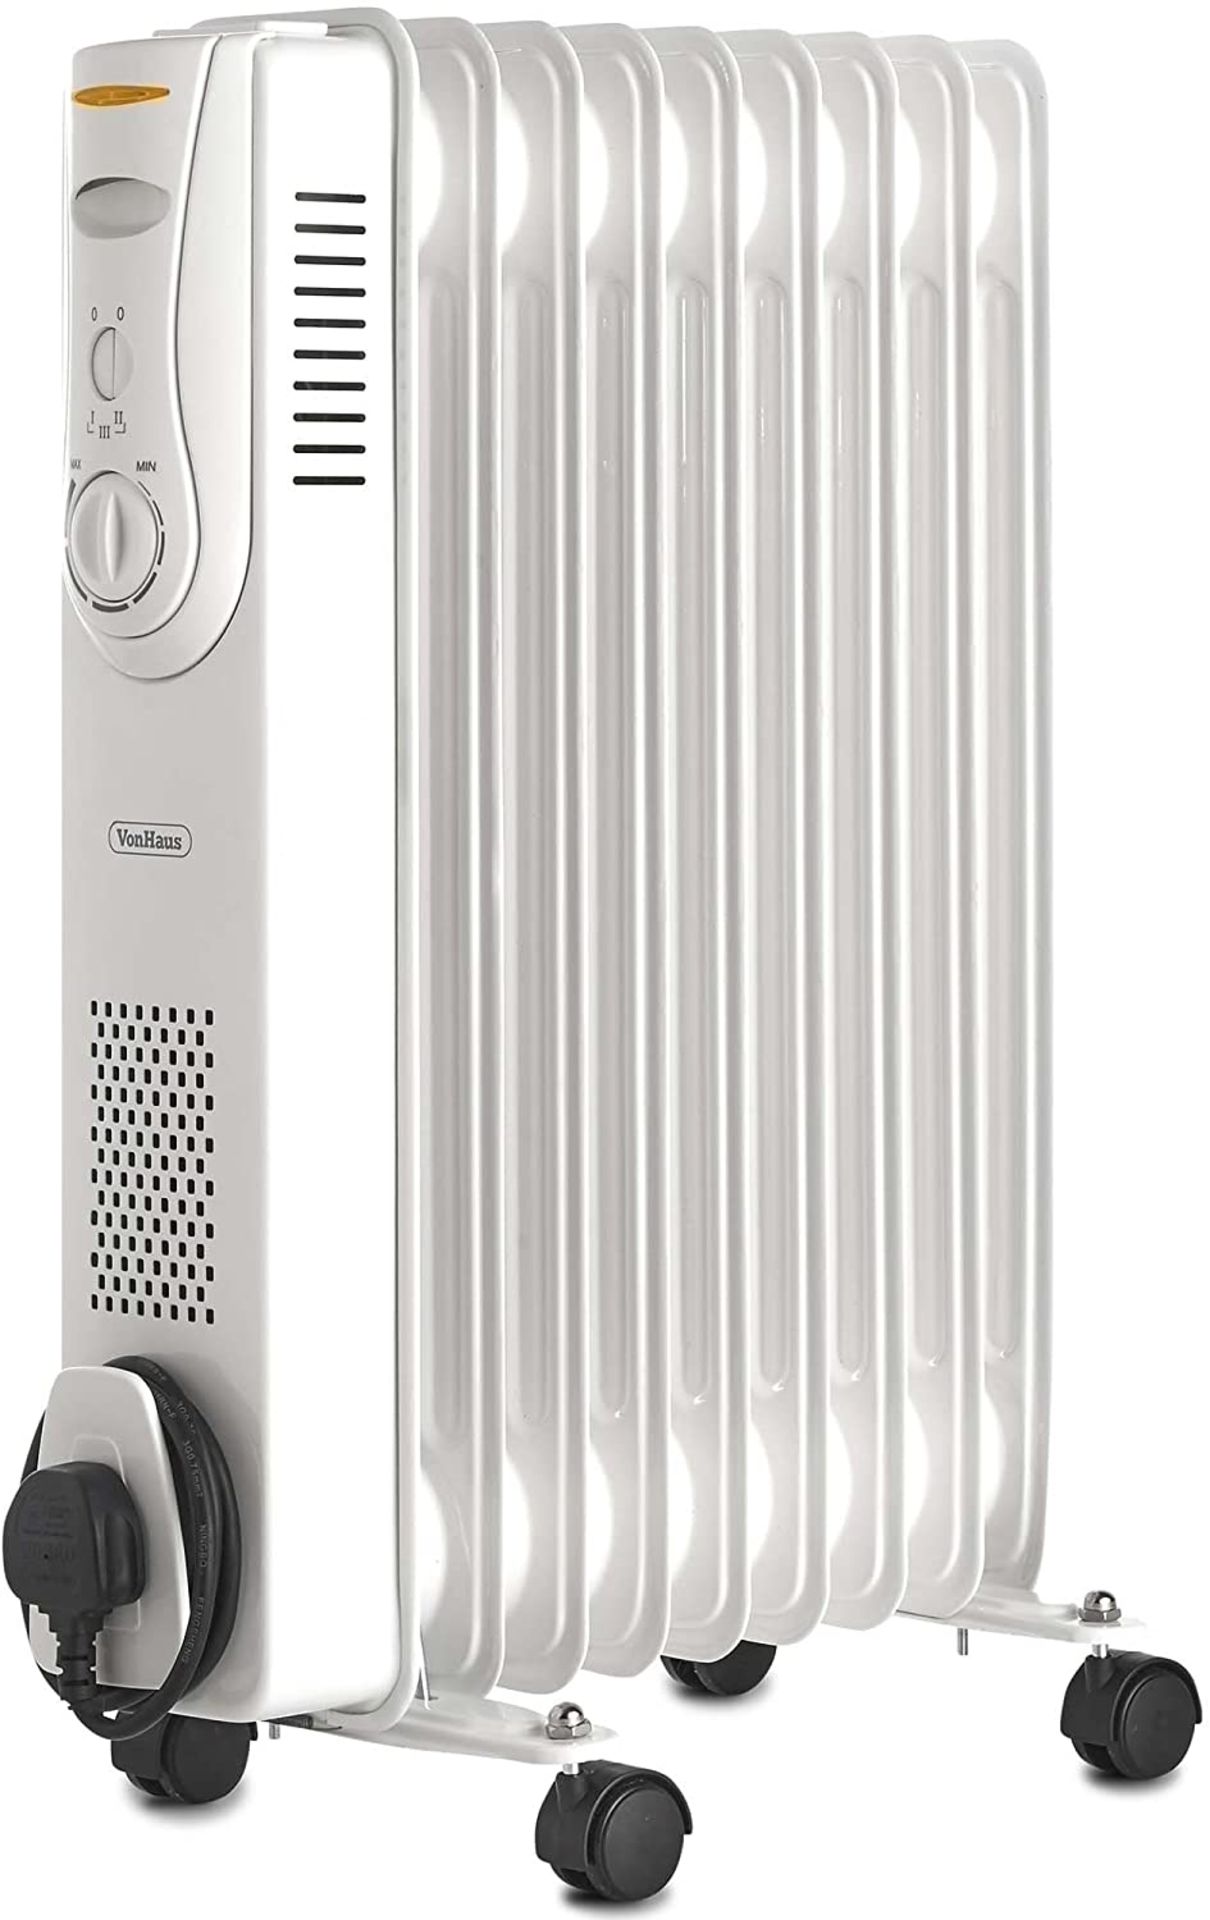 (AP73) Oil Radiator 2000 W - 3 Power Settings, Adjustable Thermostat, 9 Elements, White Color. ... - Image 2 of 3